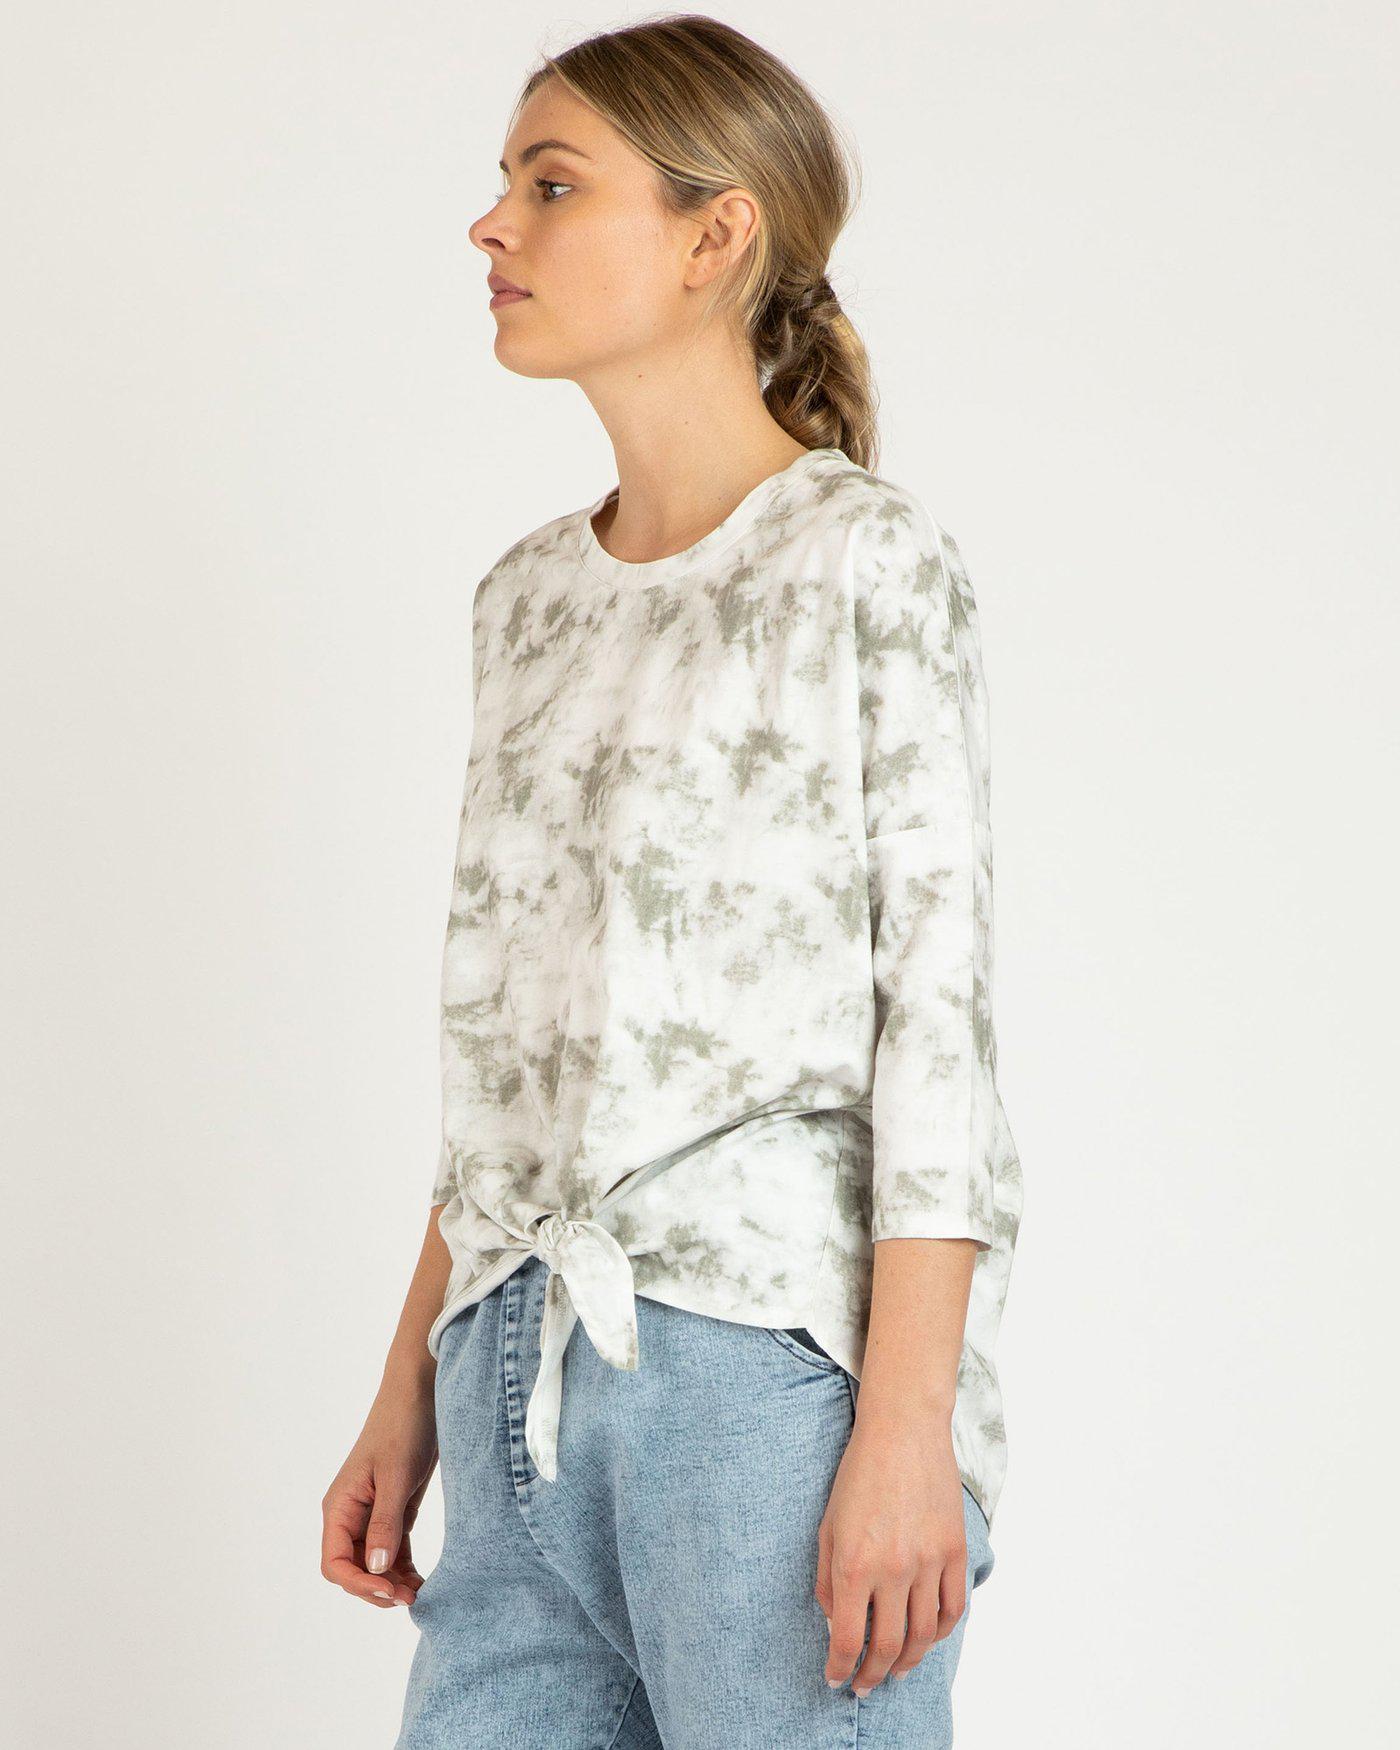 Ivy Knot Top - Fern Marble - Betty Basics - FUDGE Gifts Home Lifestyle